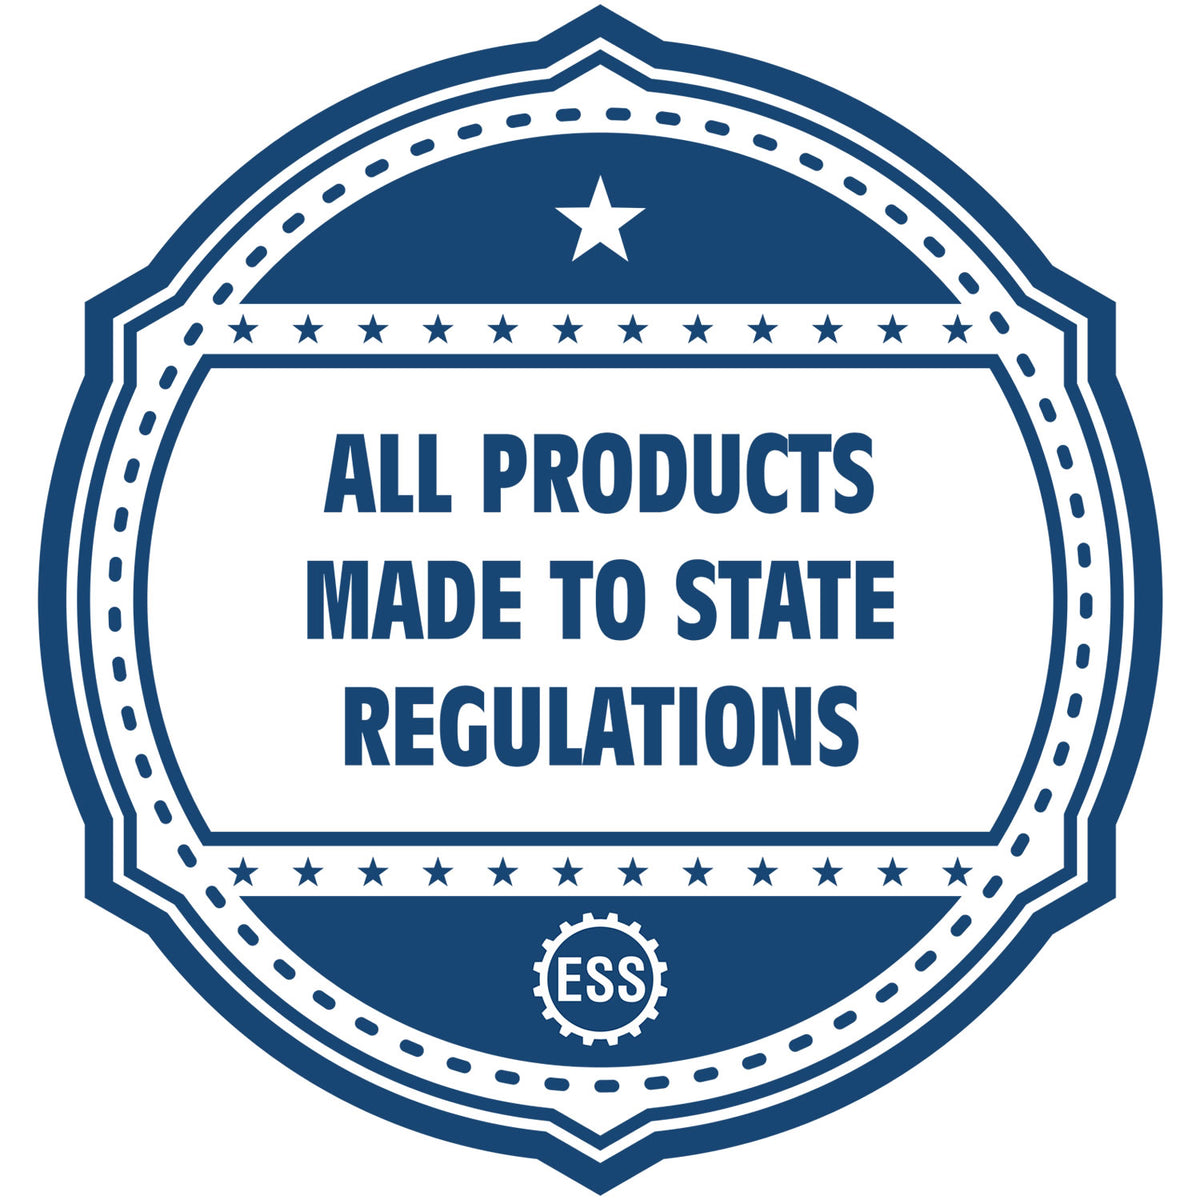 An icon or badge element for the Soft South Carolina Professional Engineer Seal showing that this product is made in compliance with state regulations.